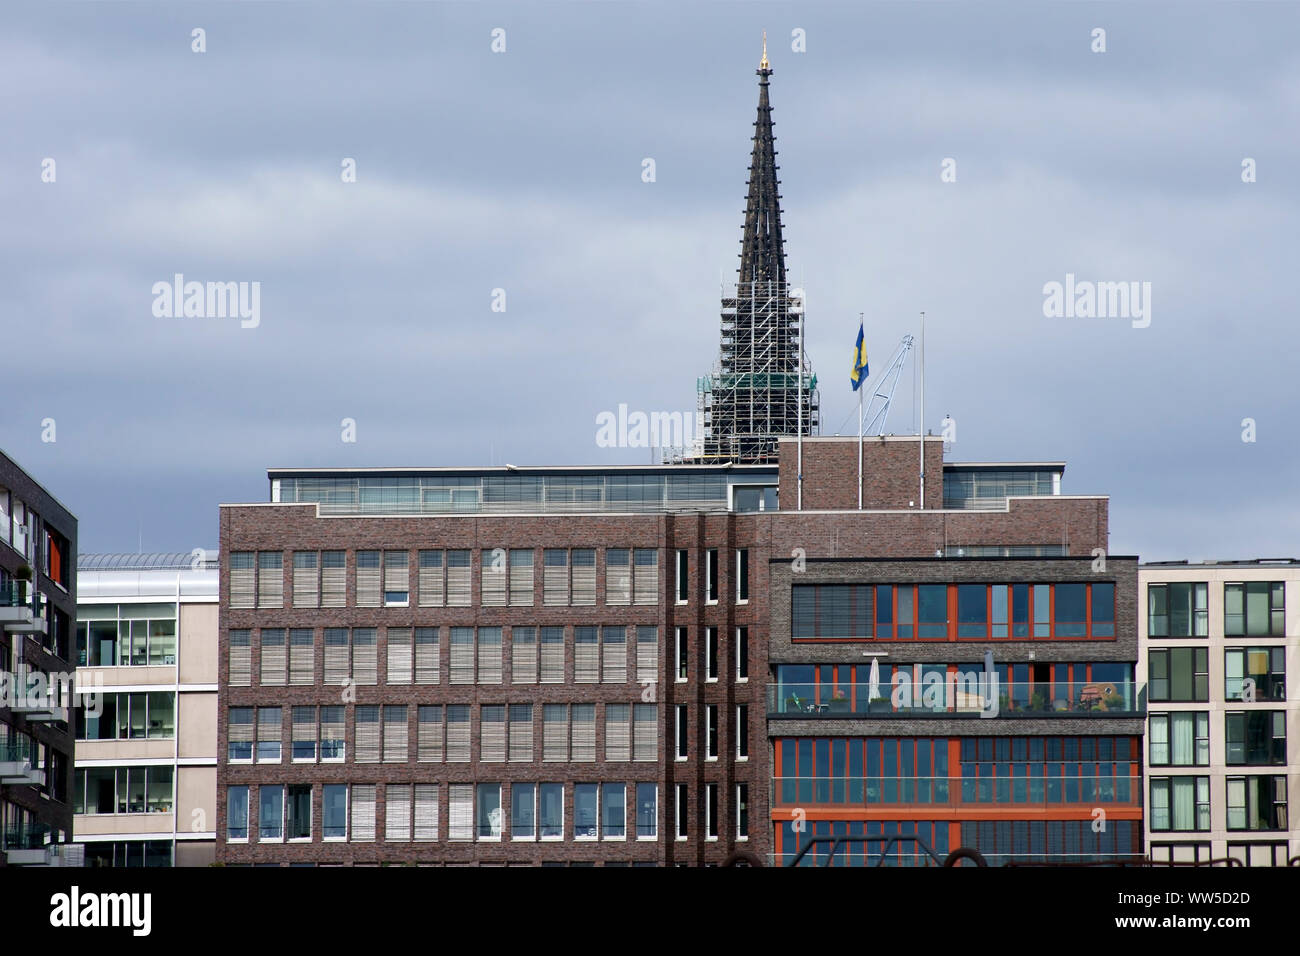 The HafenCity in Hamburg with modern residential houses, Stock Photo